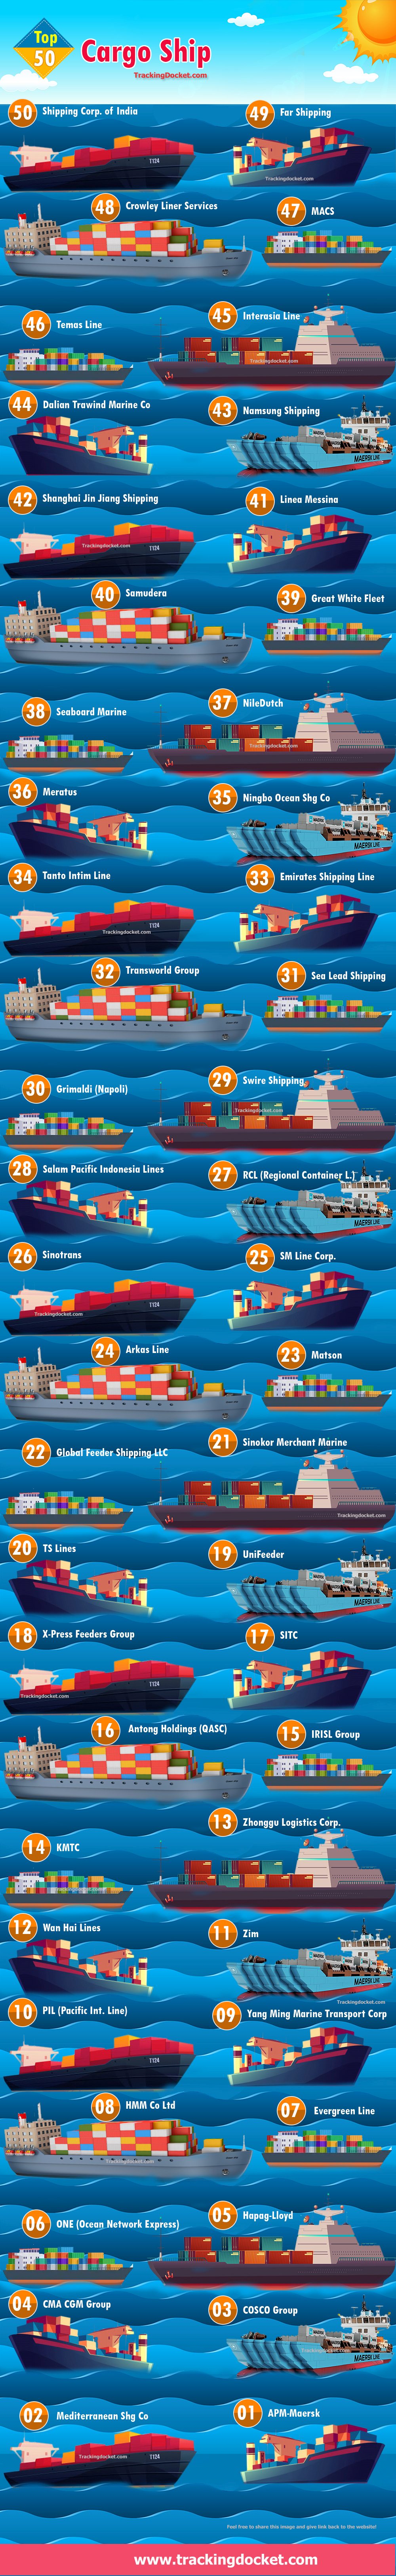 Biggest shipping companies in the world explained with an infographic